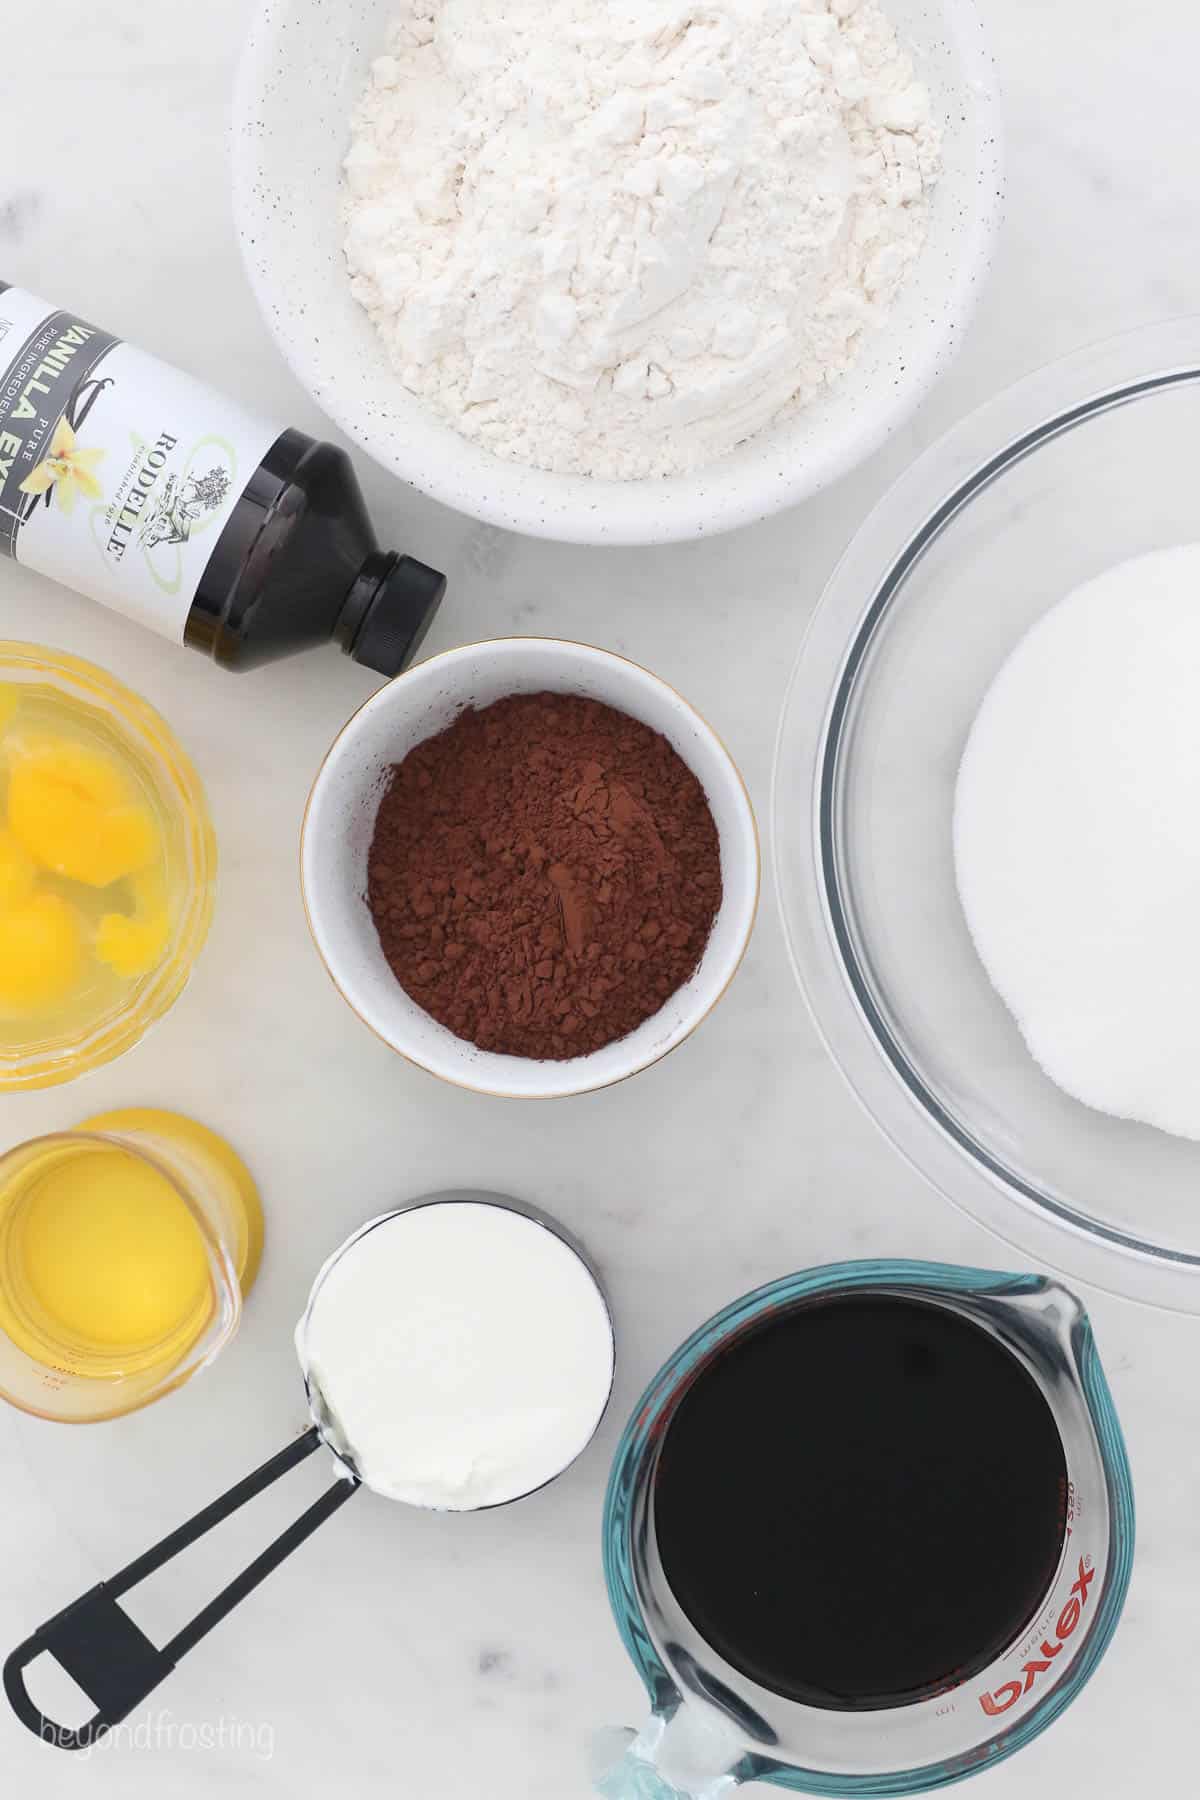 Ingredients for homemade chocolate cake